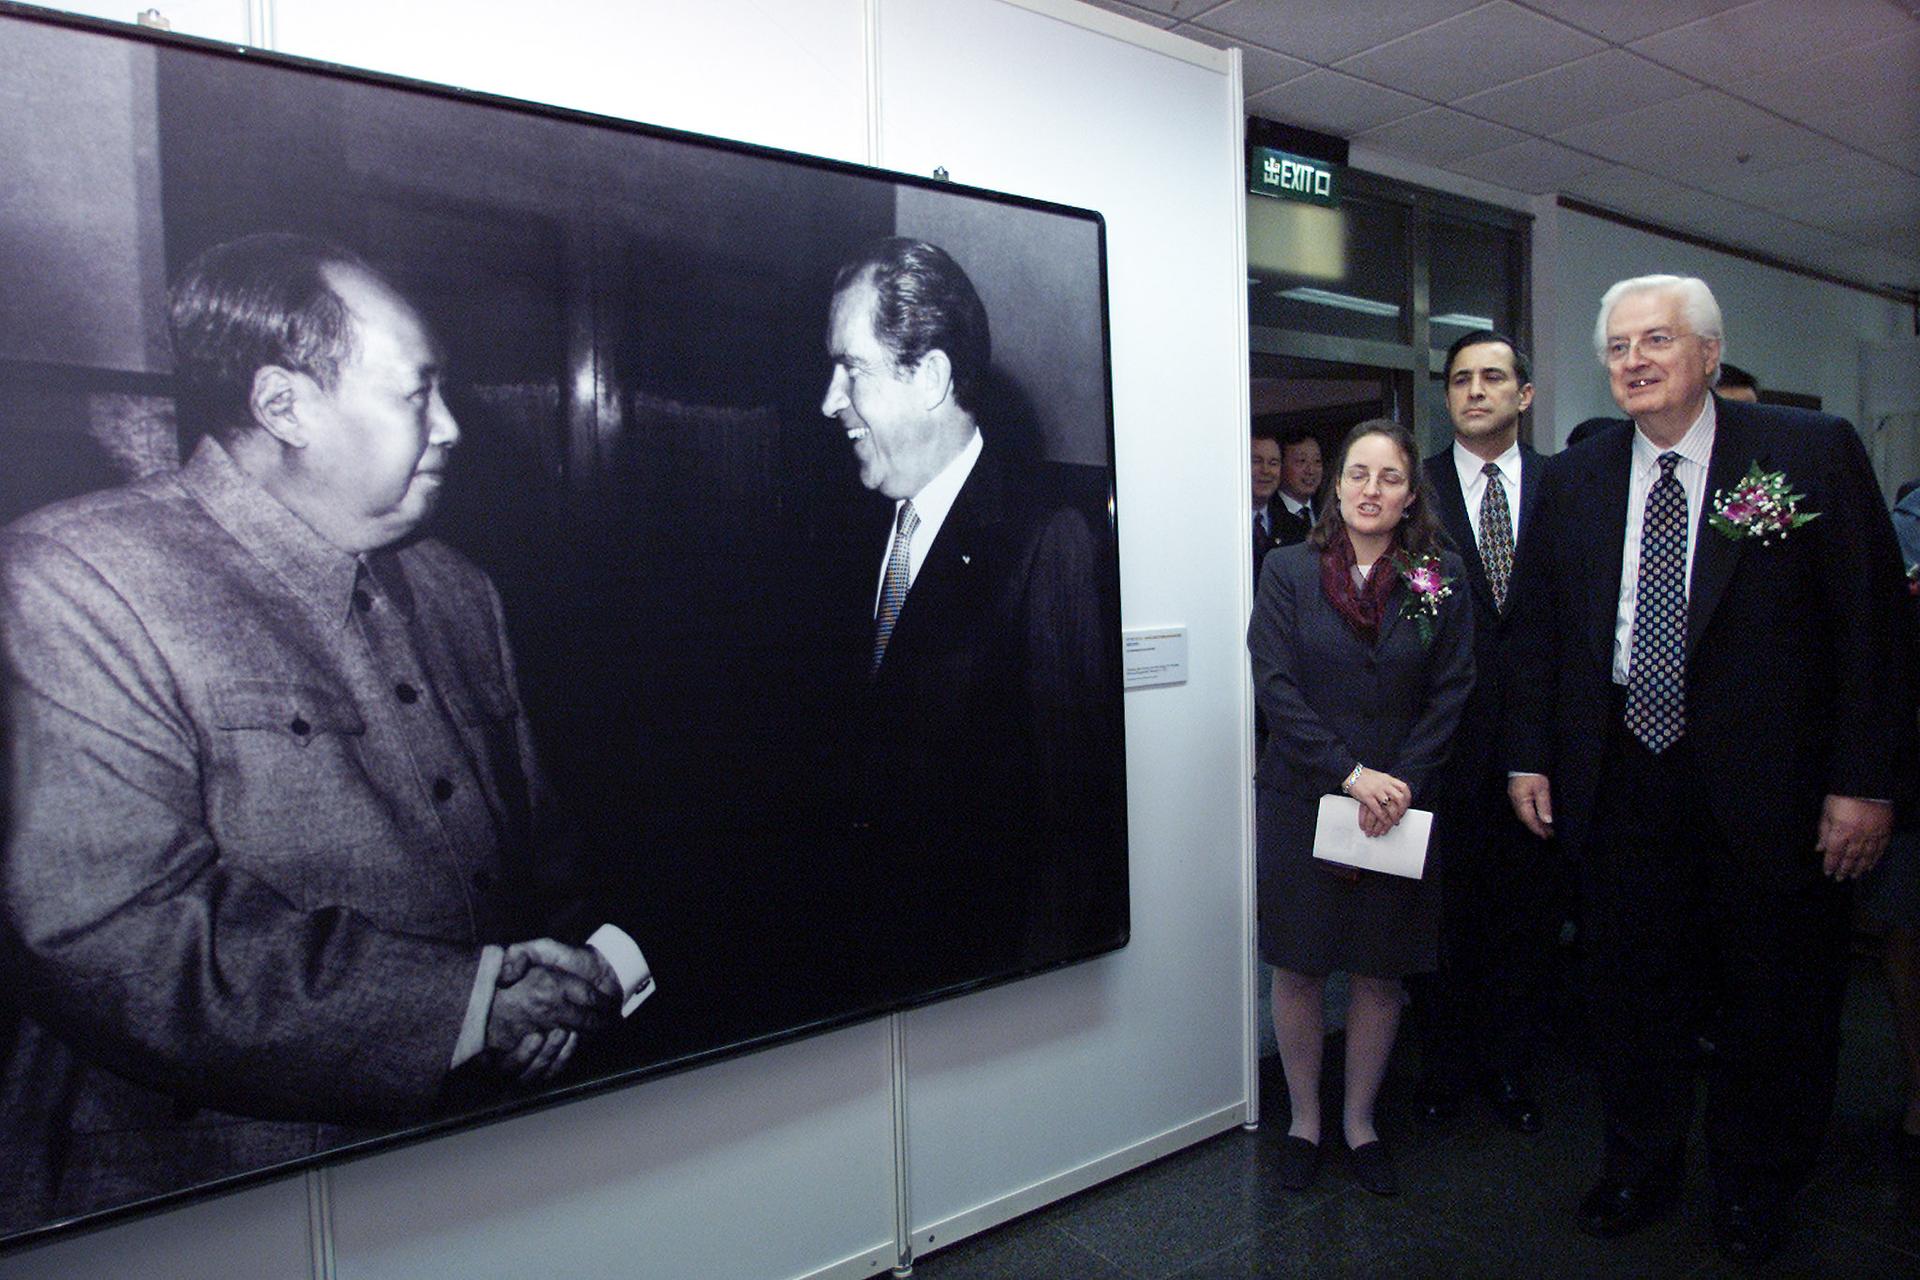 The exhibition showcased the 30th anniversary of President Richard Nixon's historic visit to China in 1972.